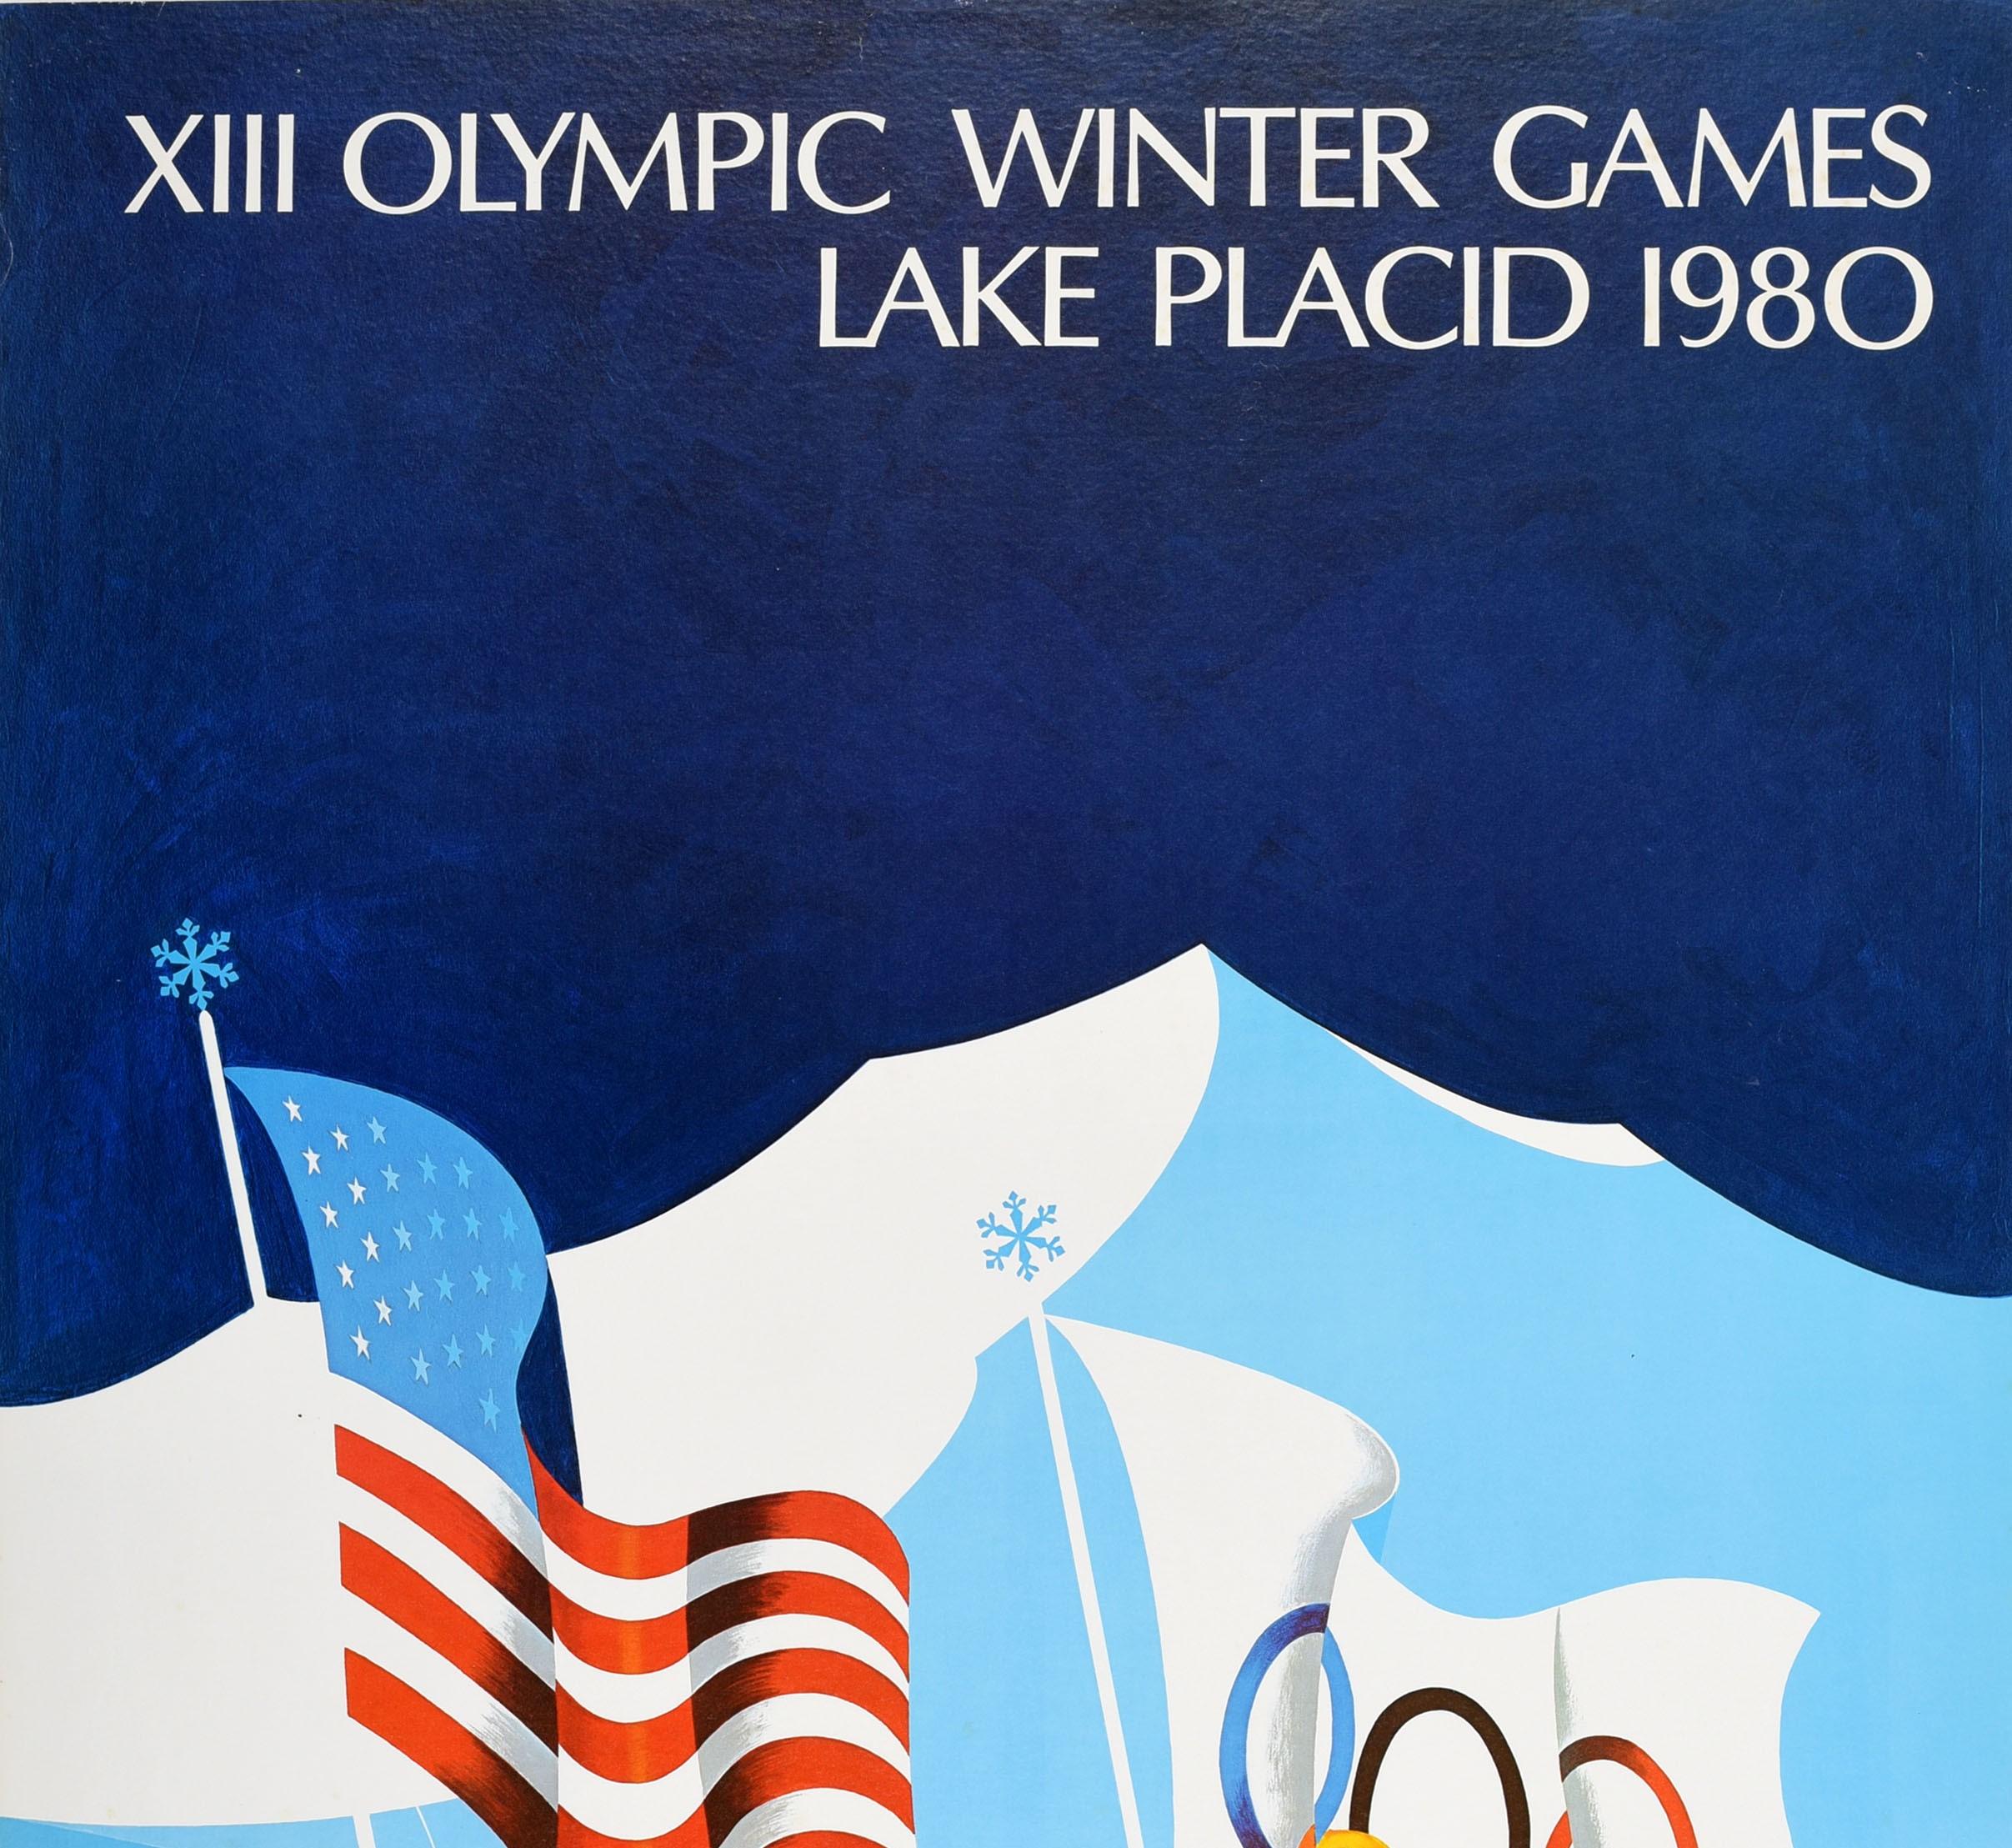 Original vintage sport poster for the XIII Olympic Winter Games Lake Placid 1980 held in New York USA from 13-24 February featuring the United States stars and stripes flag and the Olympic rings flag flying on poles topped with snowflakes in front